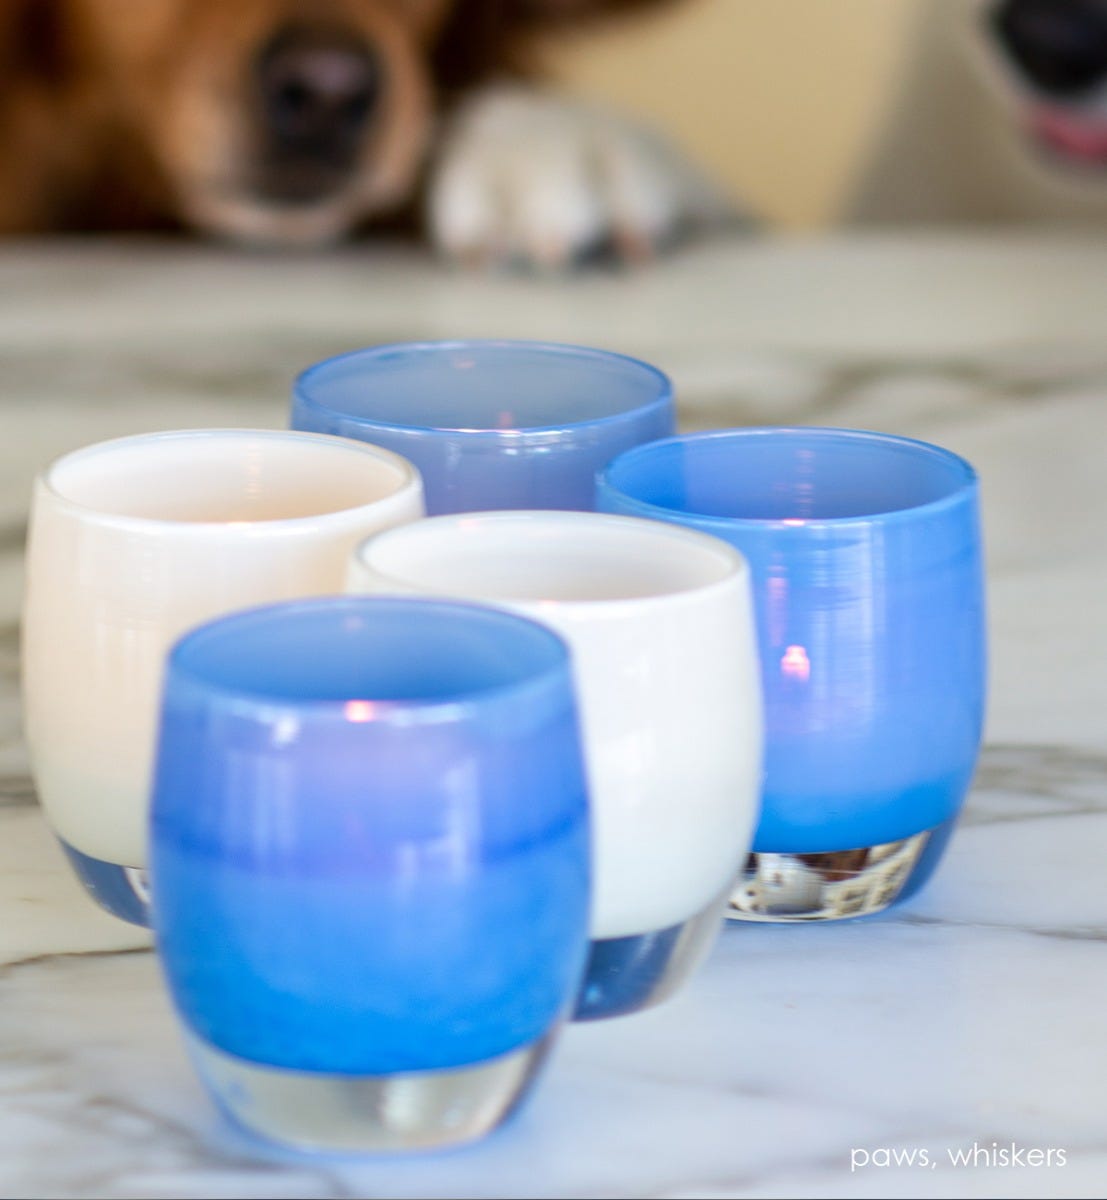 paws, opaque pale blue, hand-blown glass votive candle holder. Paired with whiskers.